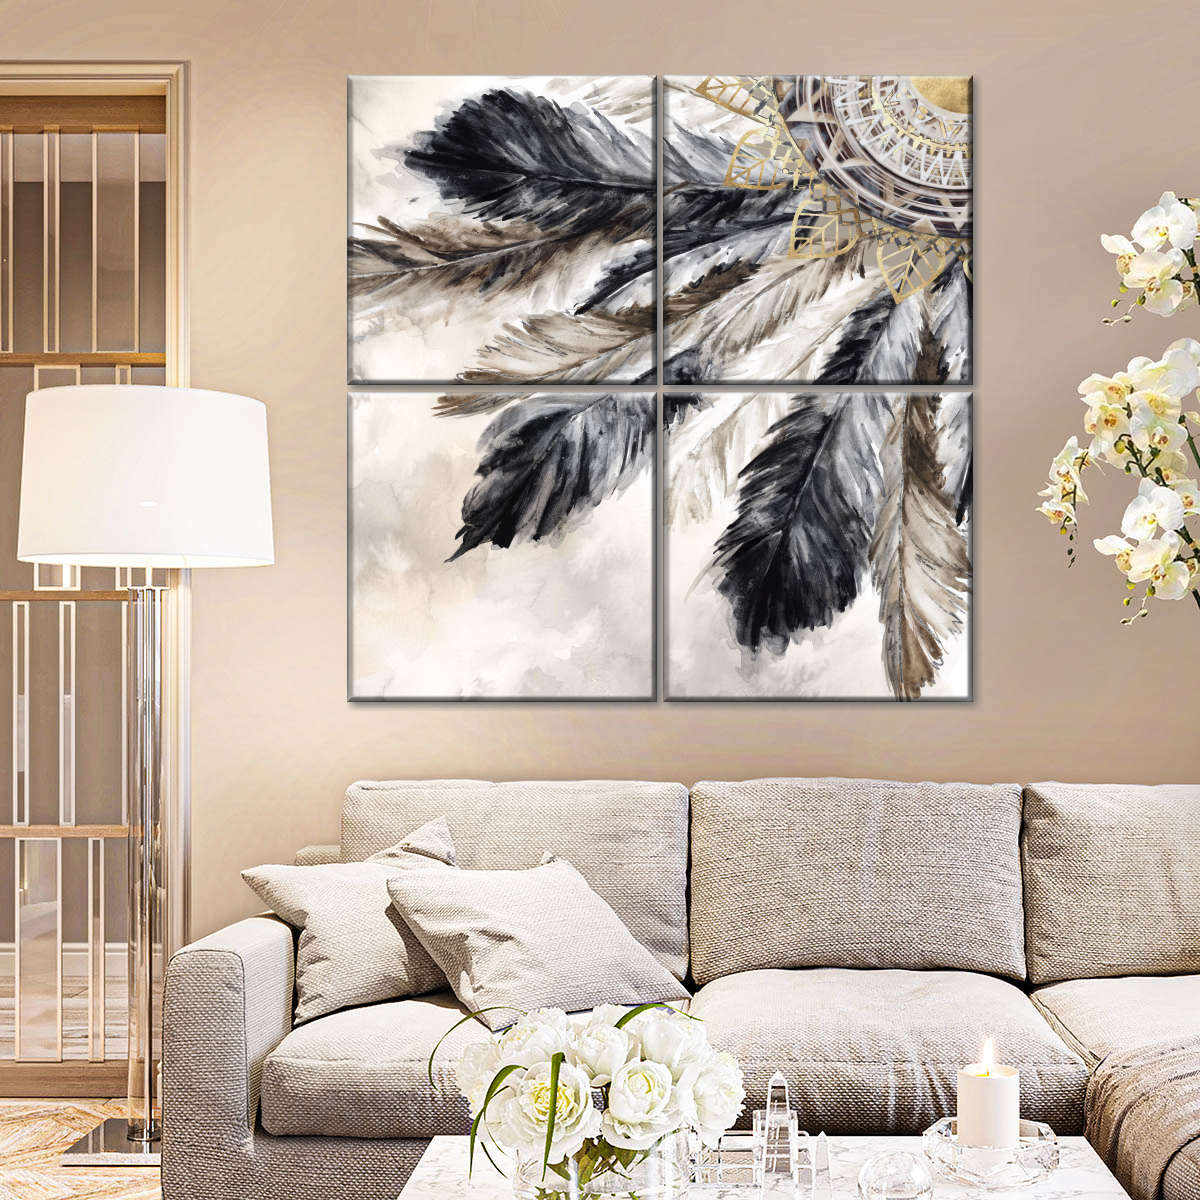 Necklace of Feathers I Wall Art | Watercolor | by Eva Watts